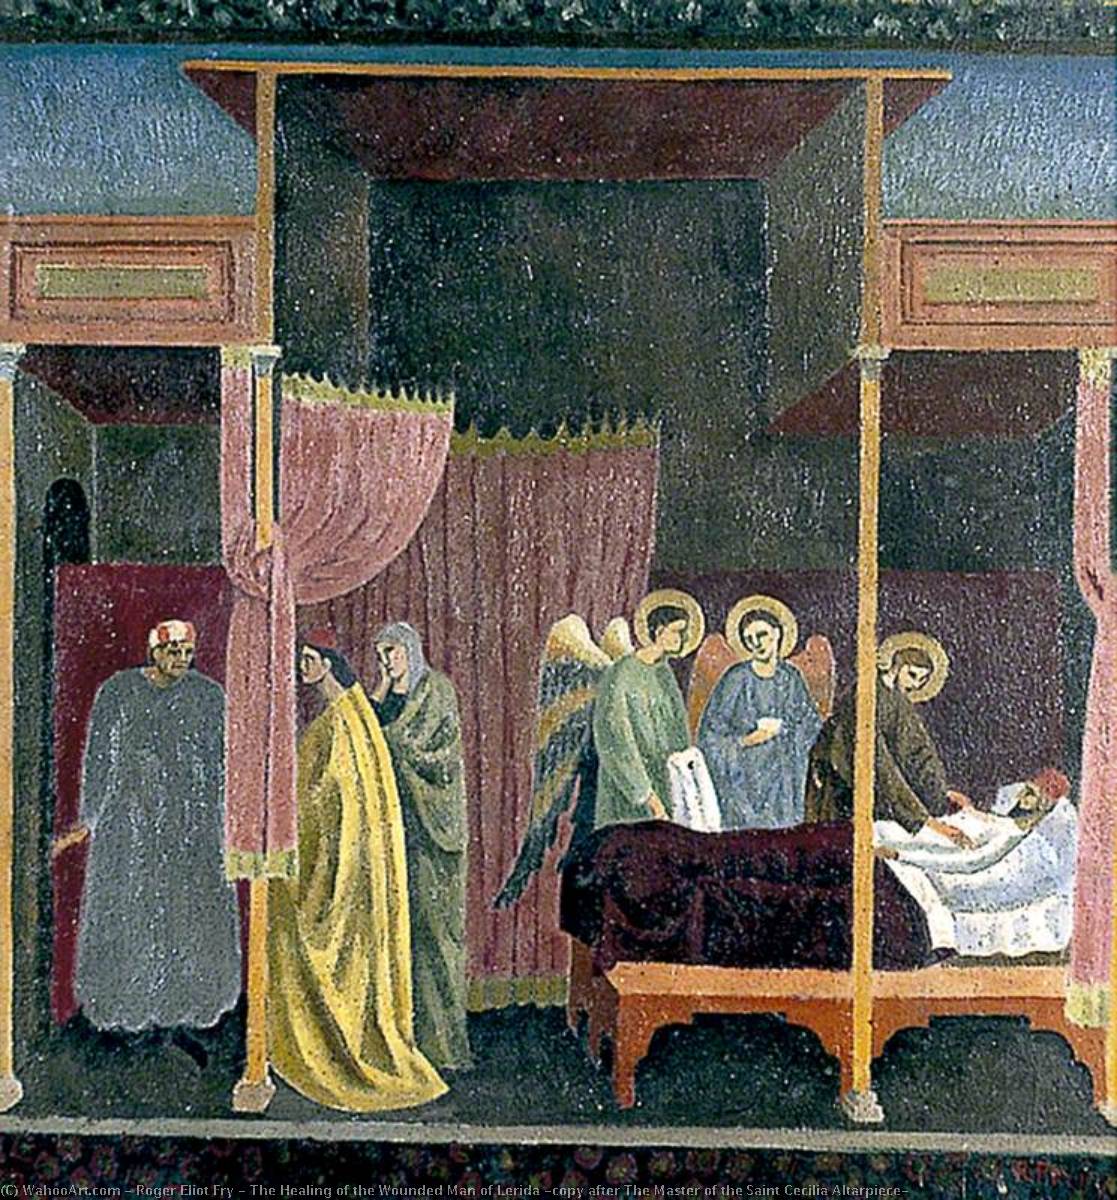 Order Oil Painting Replica The Healing of the Wounded Man of Lerida (copy after The Master of the Saint Cecilia Altarpiece), 1917 by Roger Eliot Fry (1866-1934) | ArtsDot.com